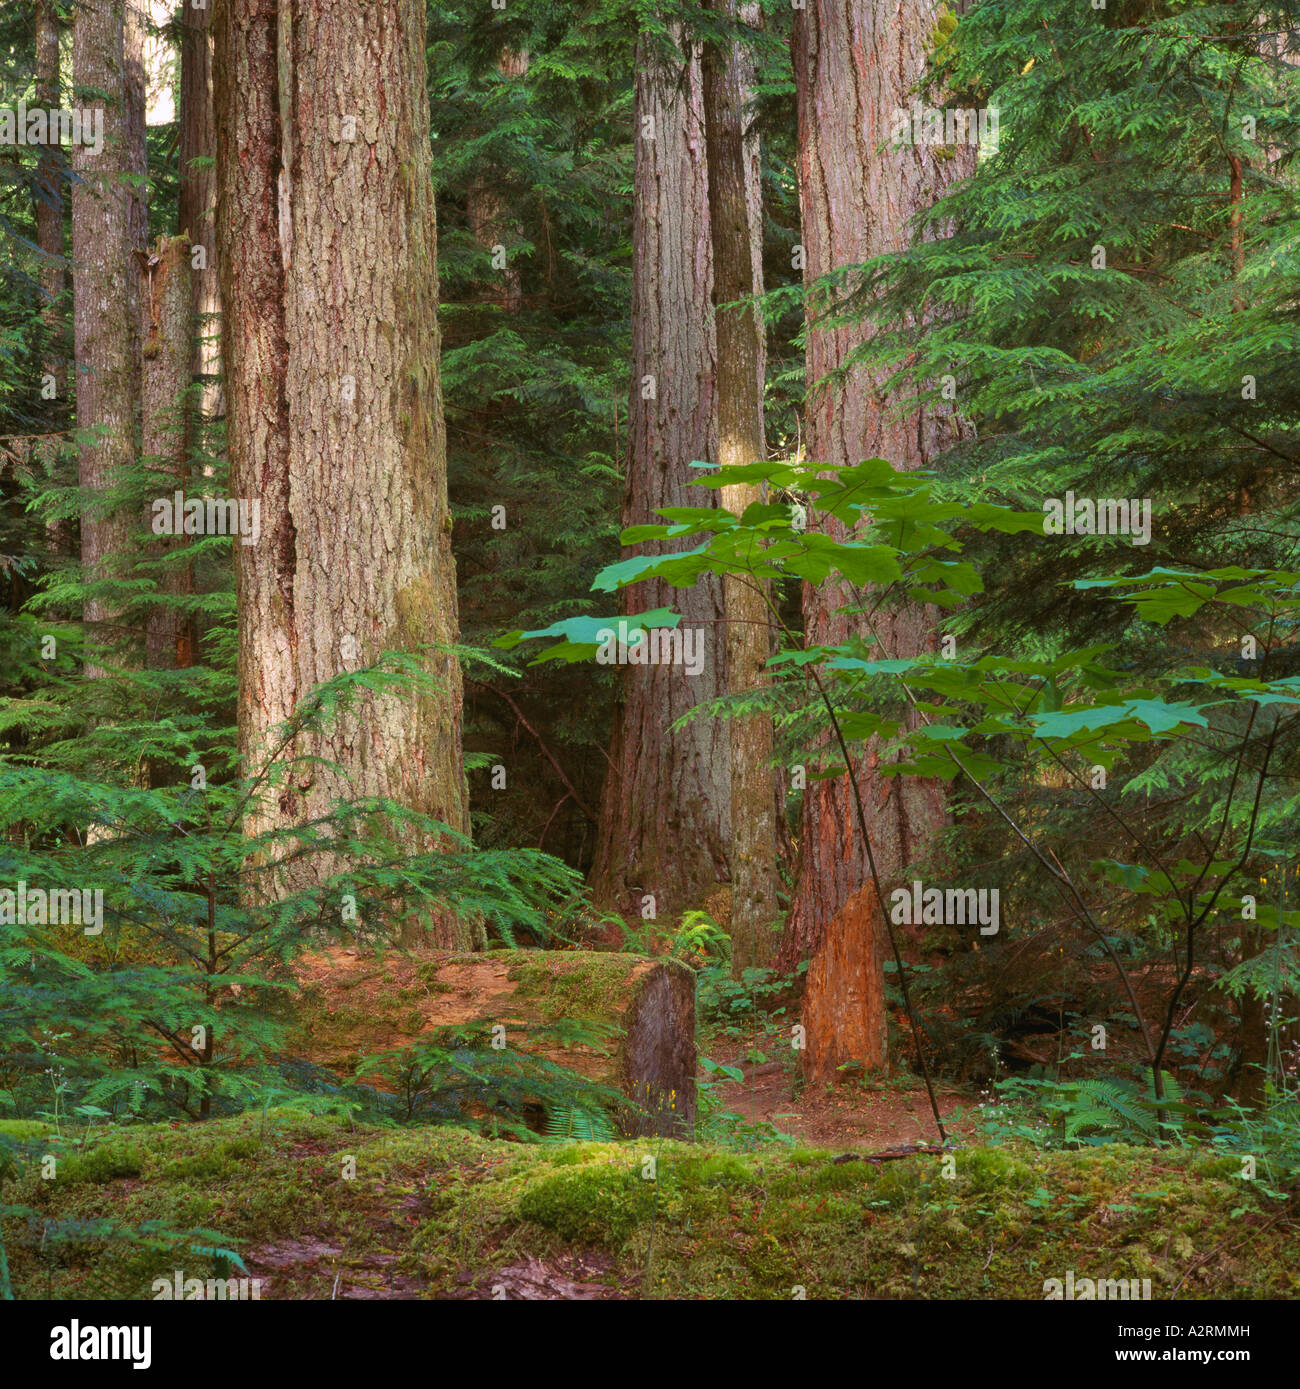 Douglas Fir Trees (Pseudotsuga menziesii) grow in Cathedral Grove - an Old Growth Temperate Rainforest, British Columbia, Canada Stock Photo